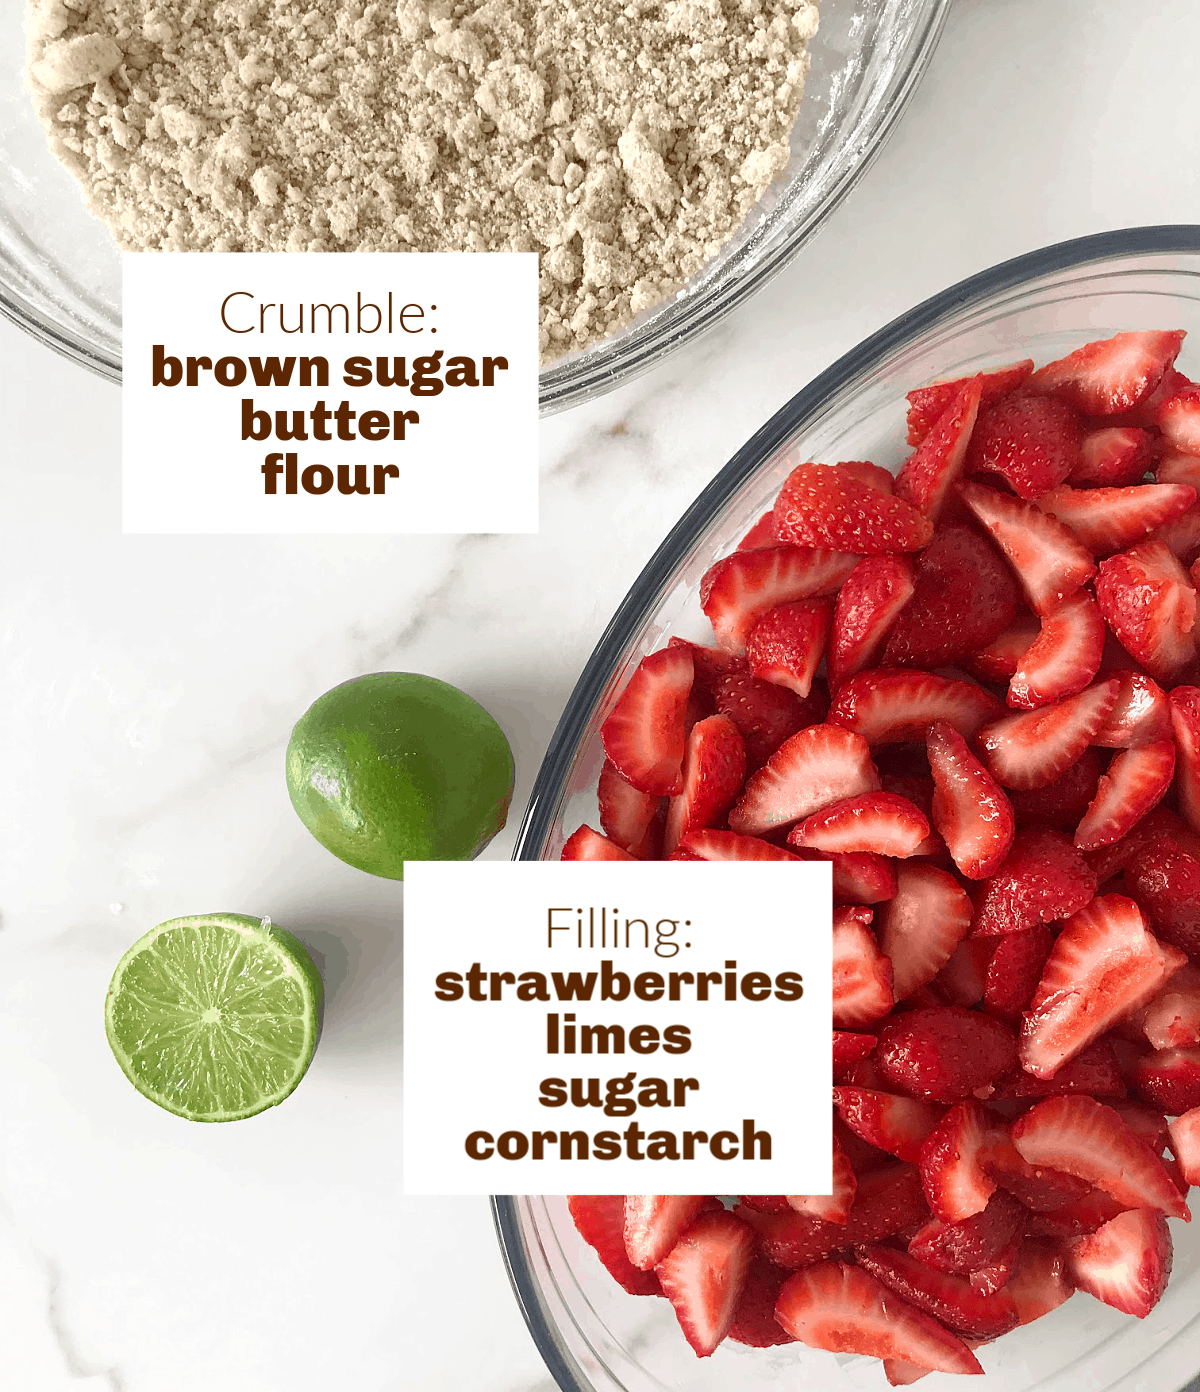 Image with text; limes, dish with strawberries, bowl with crumble.